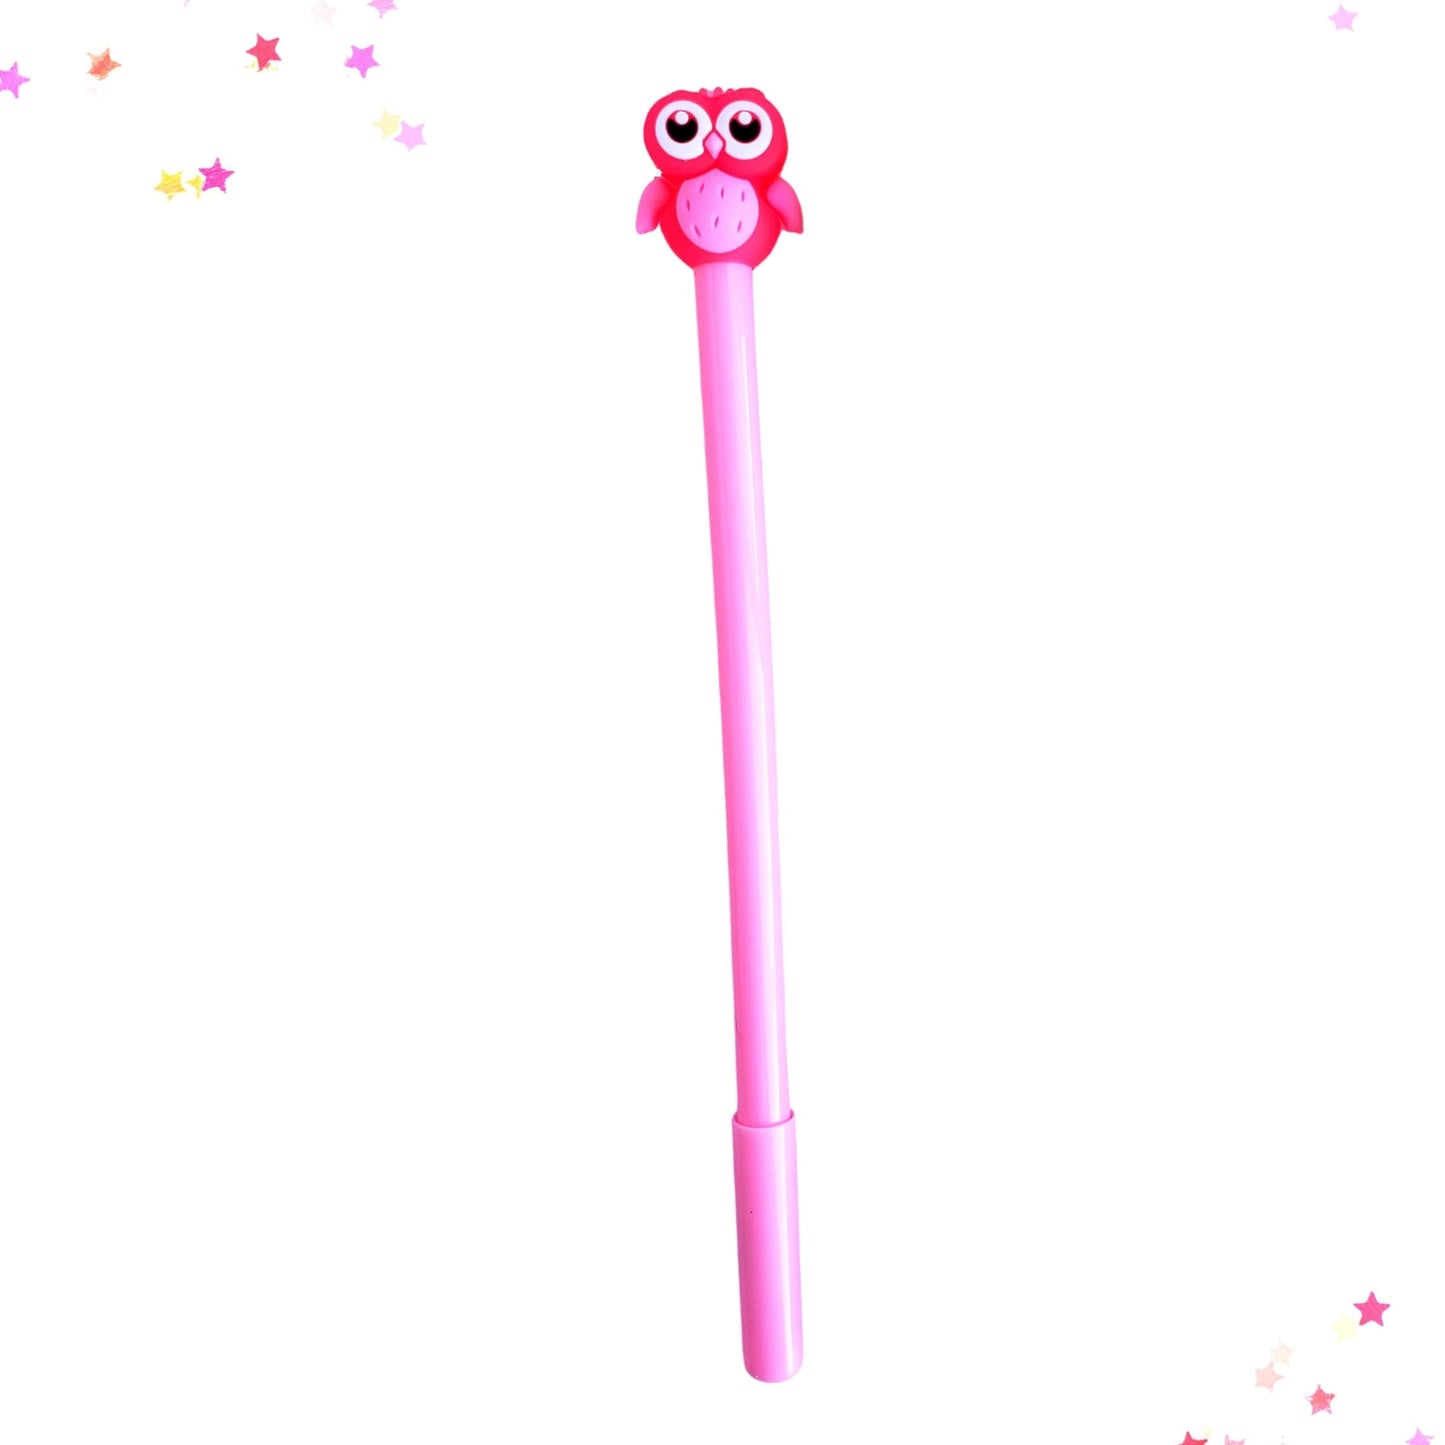 Whimsical Owl Gel Pen in Pink from Confetti Kitty, Only 2.99